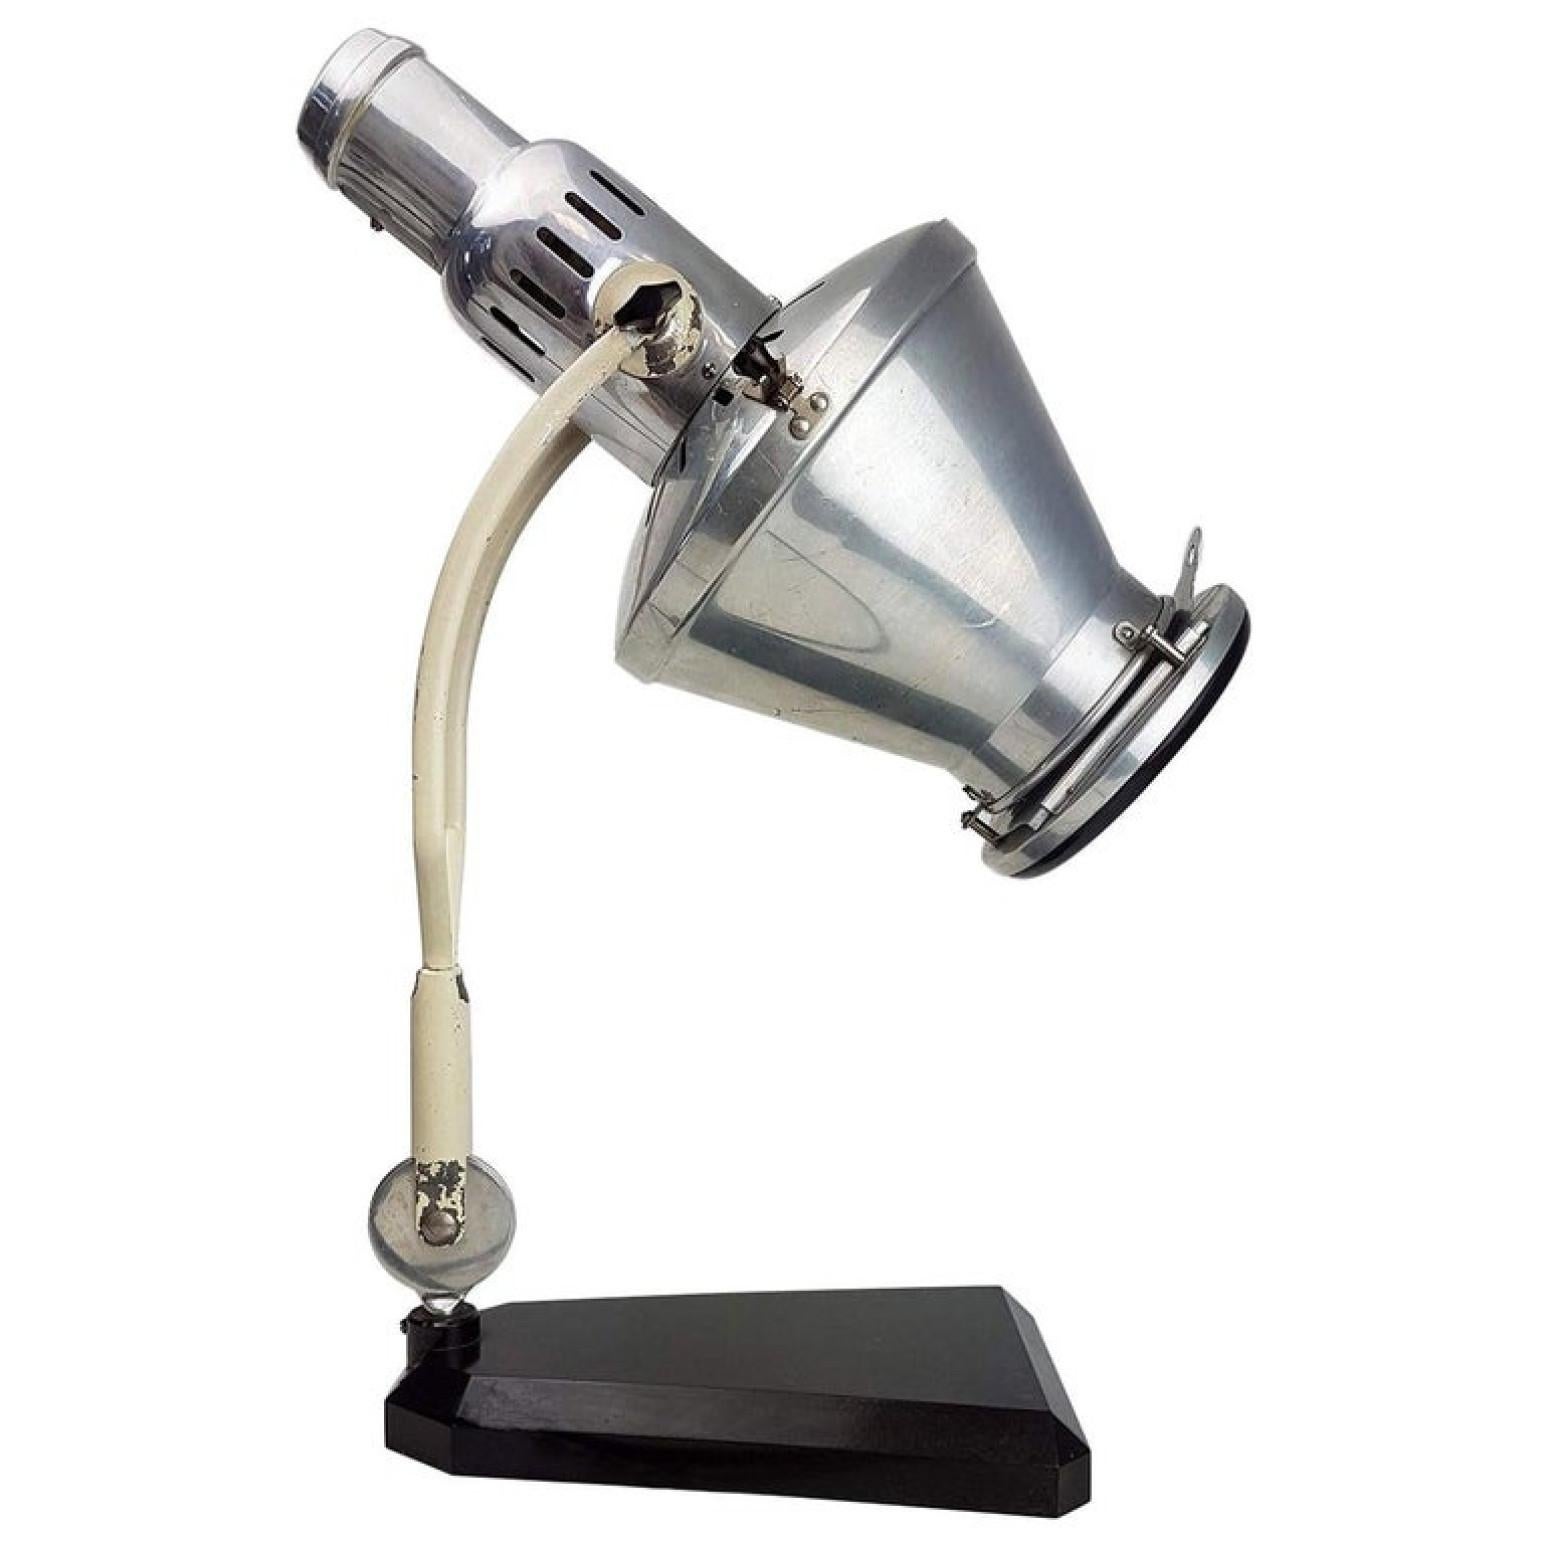 The Hanau company has built medical lamps since the 1920s. With a Bakelite counter. It is a Classic and always in style.
Sollux Hanau radiation lamp in restored original condition.

The lamp has been converted for ordinary household use with an